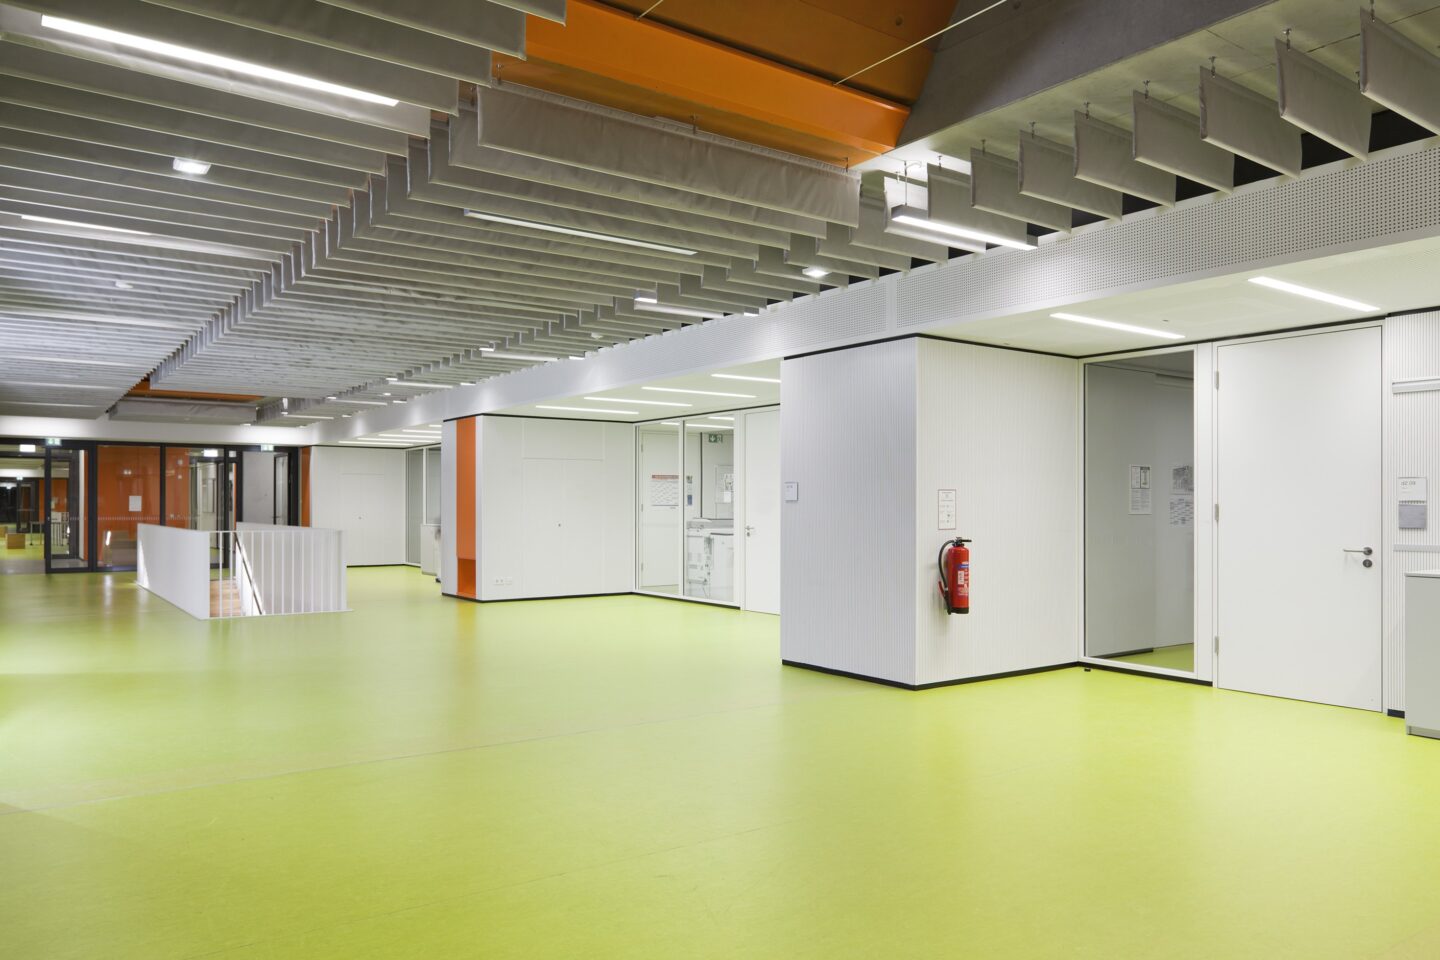 Gymnasium Trudering │ system walls from feco │ acoustics